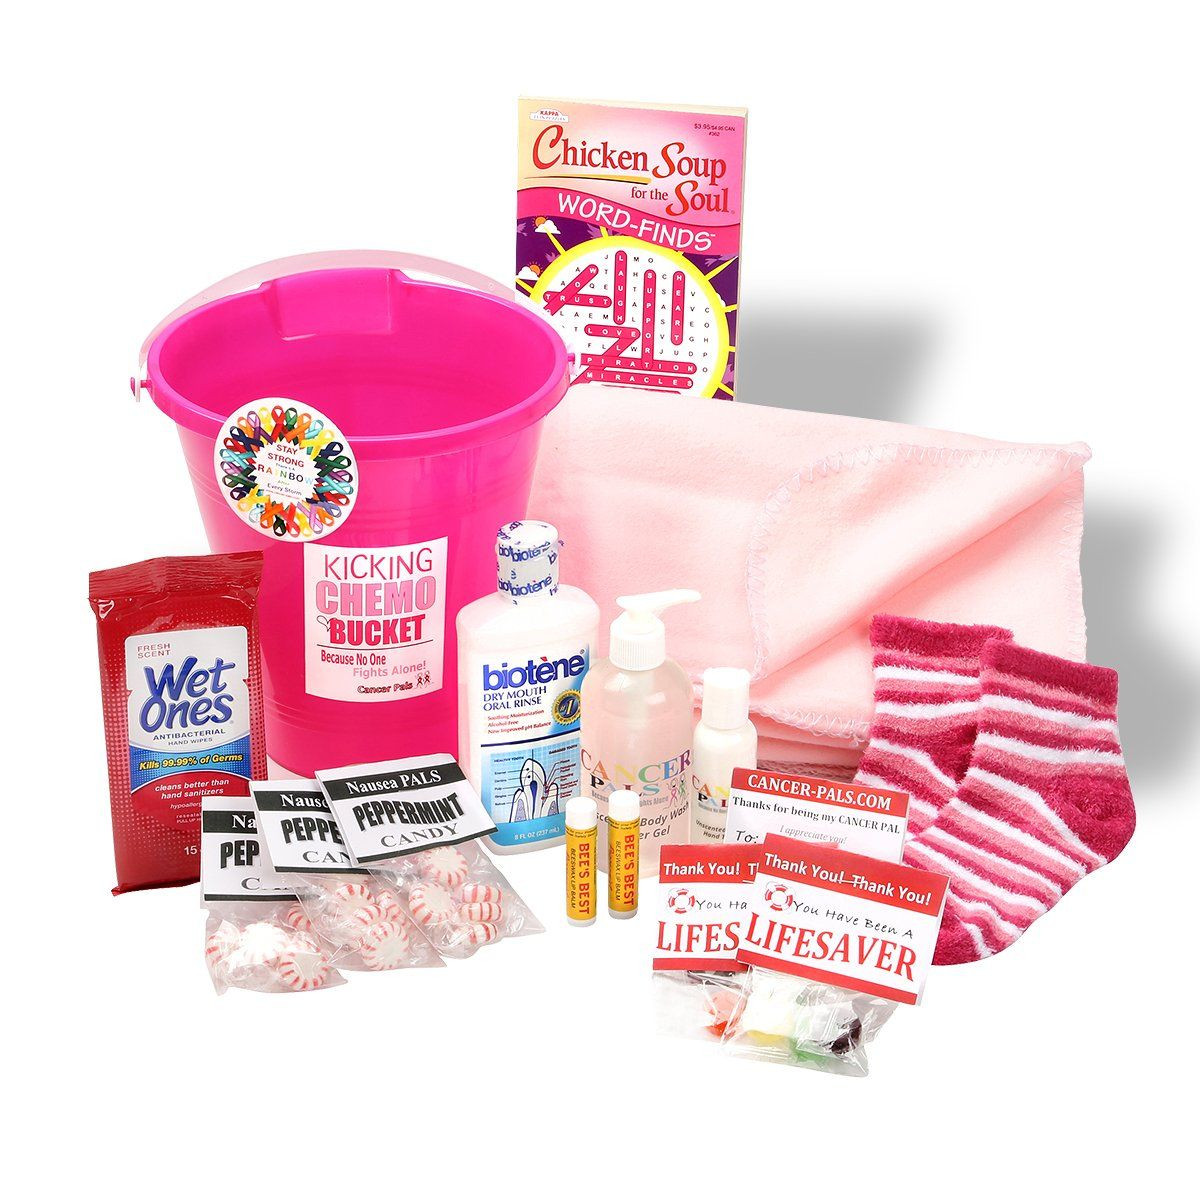 Gift Basket Ideas For Cancer Patients
 The top 22 Ideas About Gift Basket Ideas for Breast Cancer